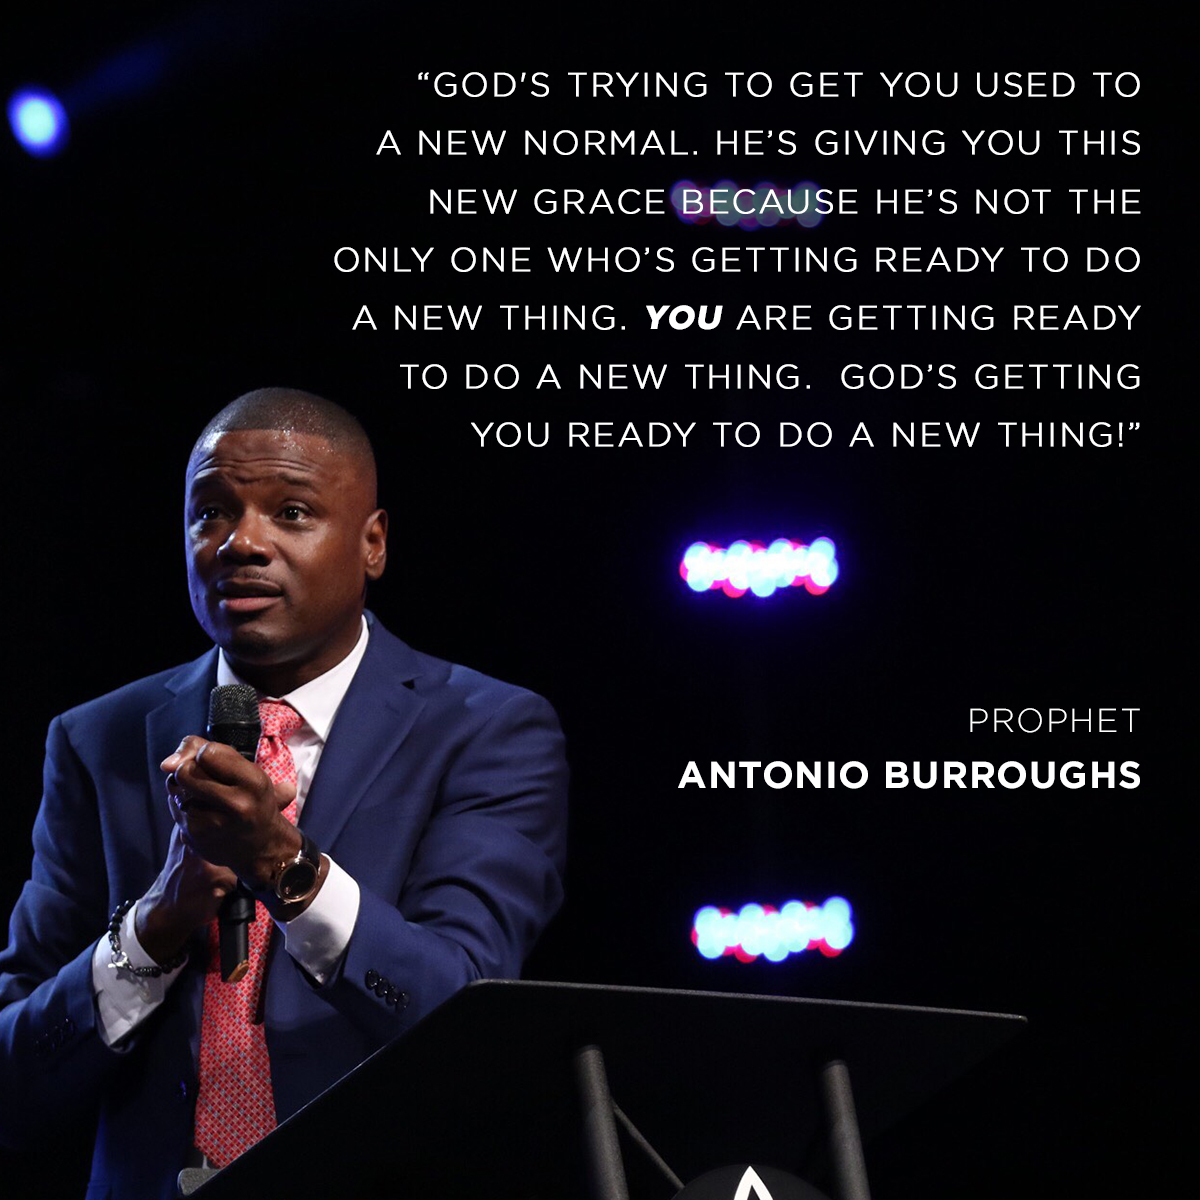 “God's trying to get you used to a new normal. He’s giving you this new grace because He’s not the only one who’s getting ready to do a new thing. You are getting ready to do a new thing.  God’s getting you ready to do a new thing!” – Prophet Antonio Burroughs